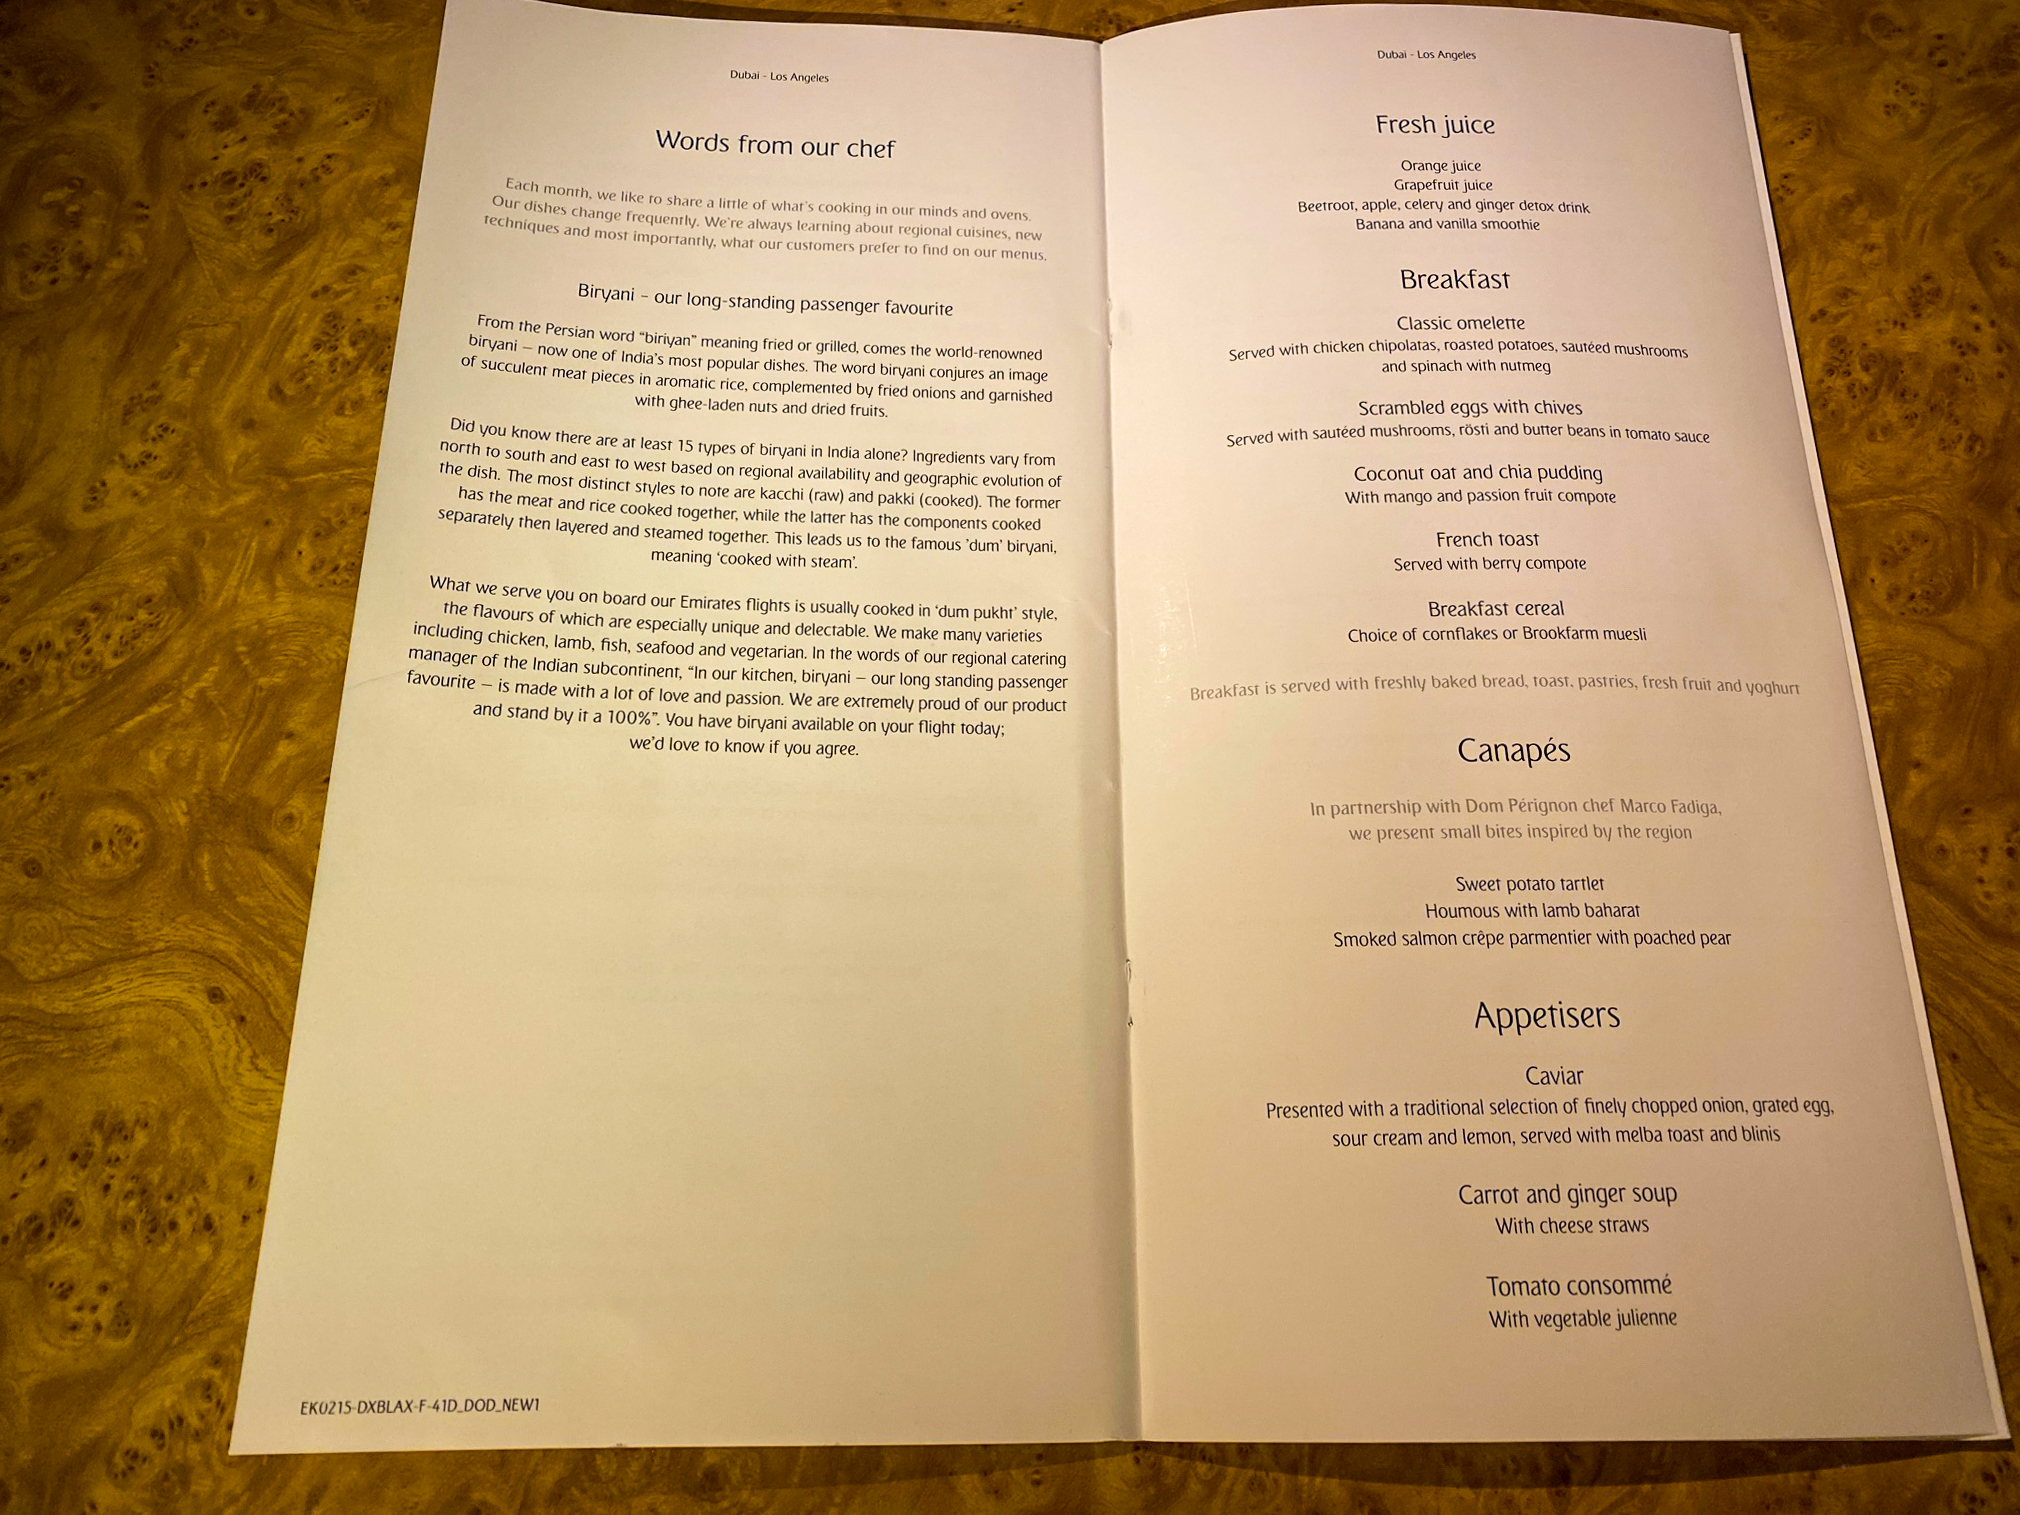 Emirates 777 First Class Food And Beverage Menu